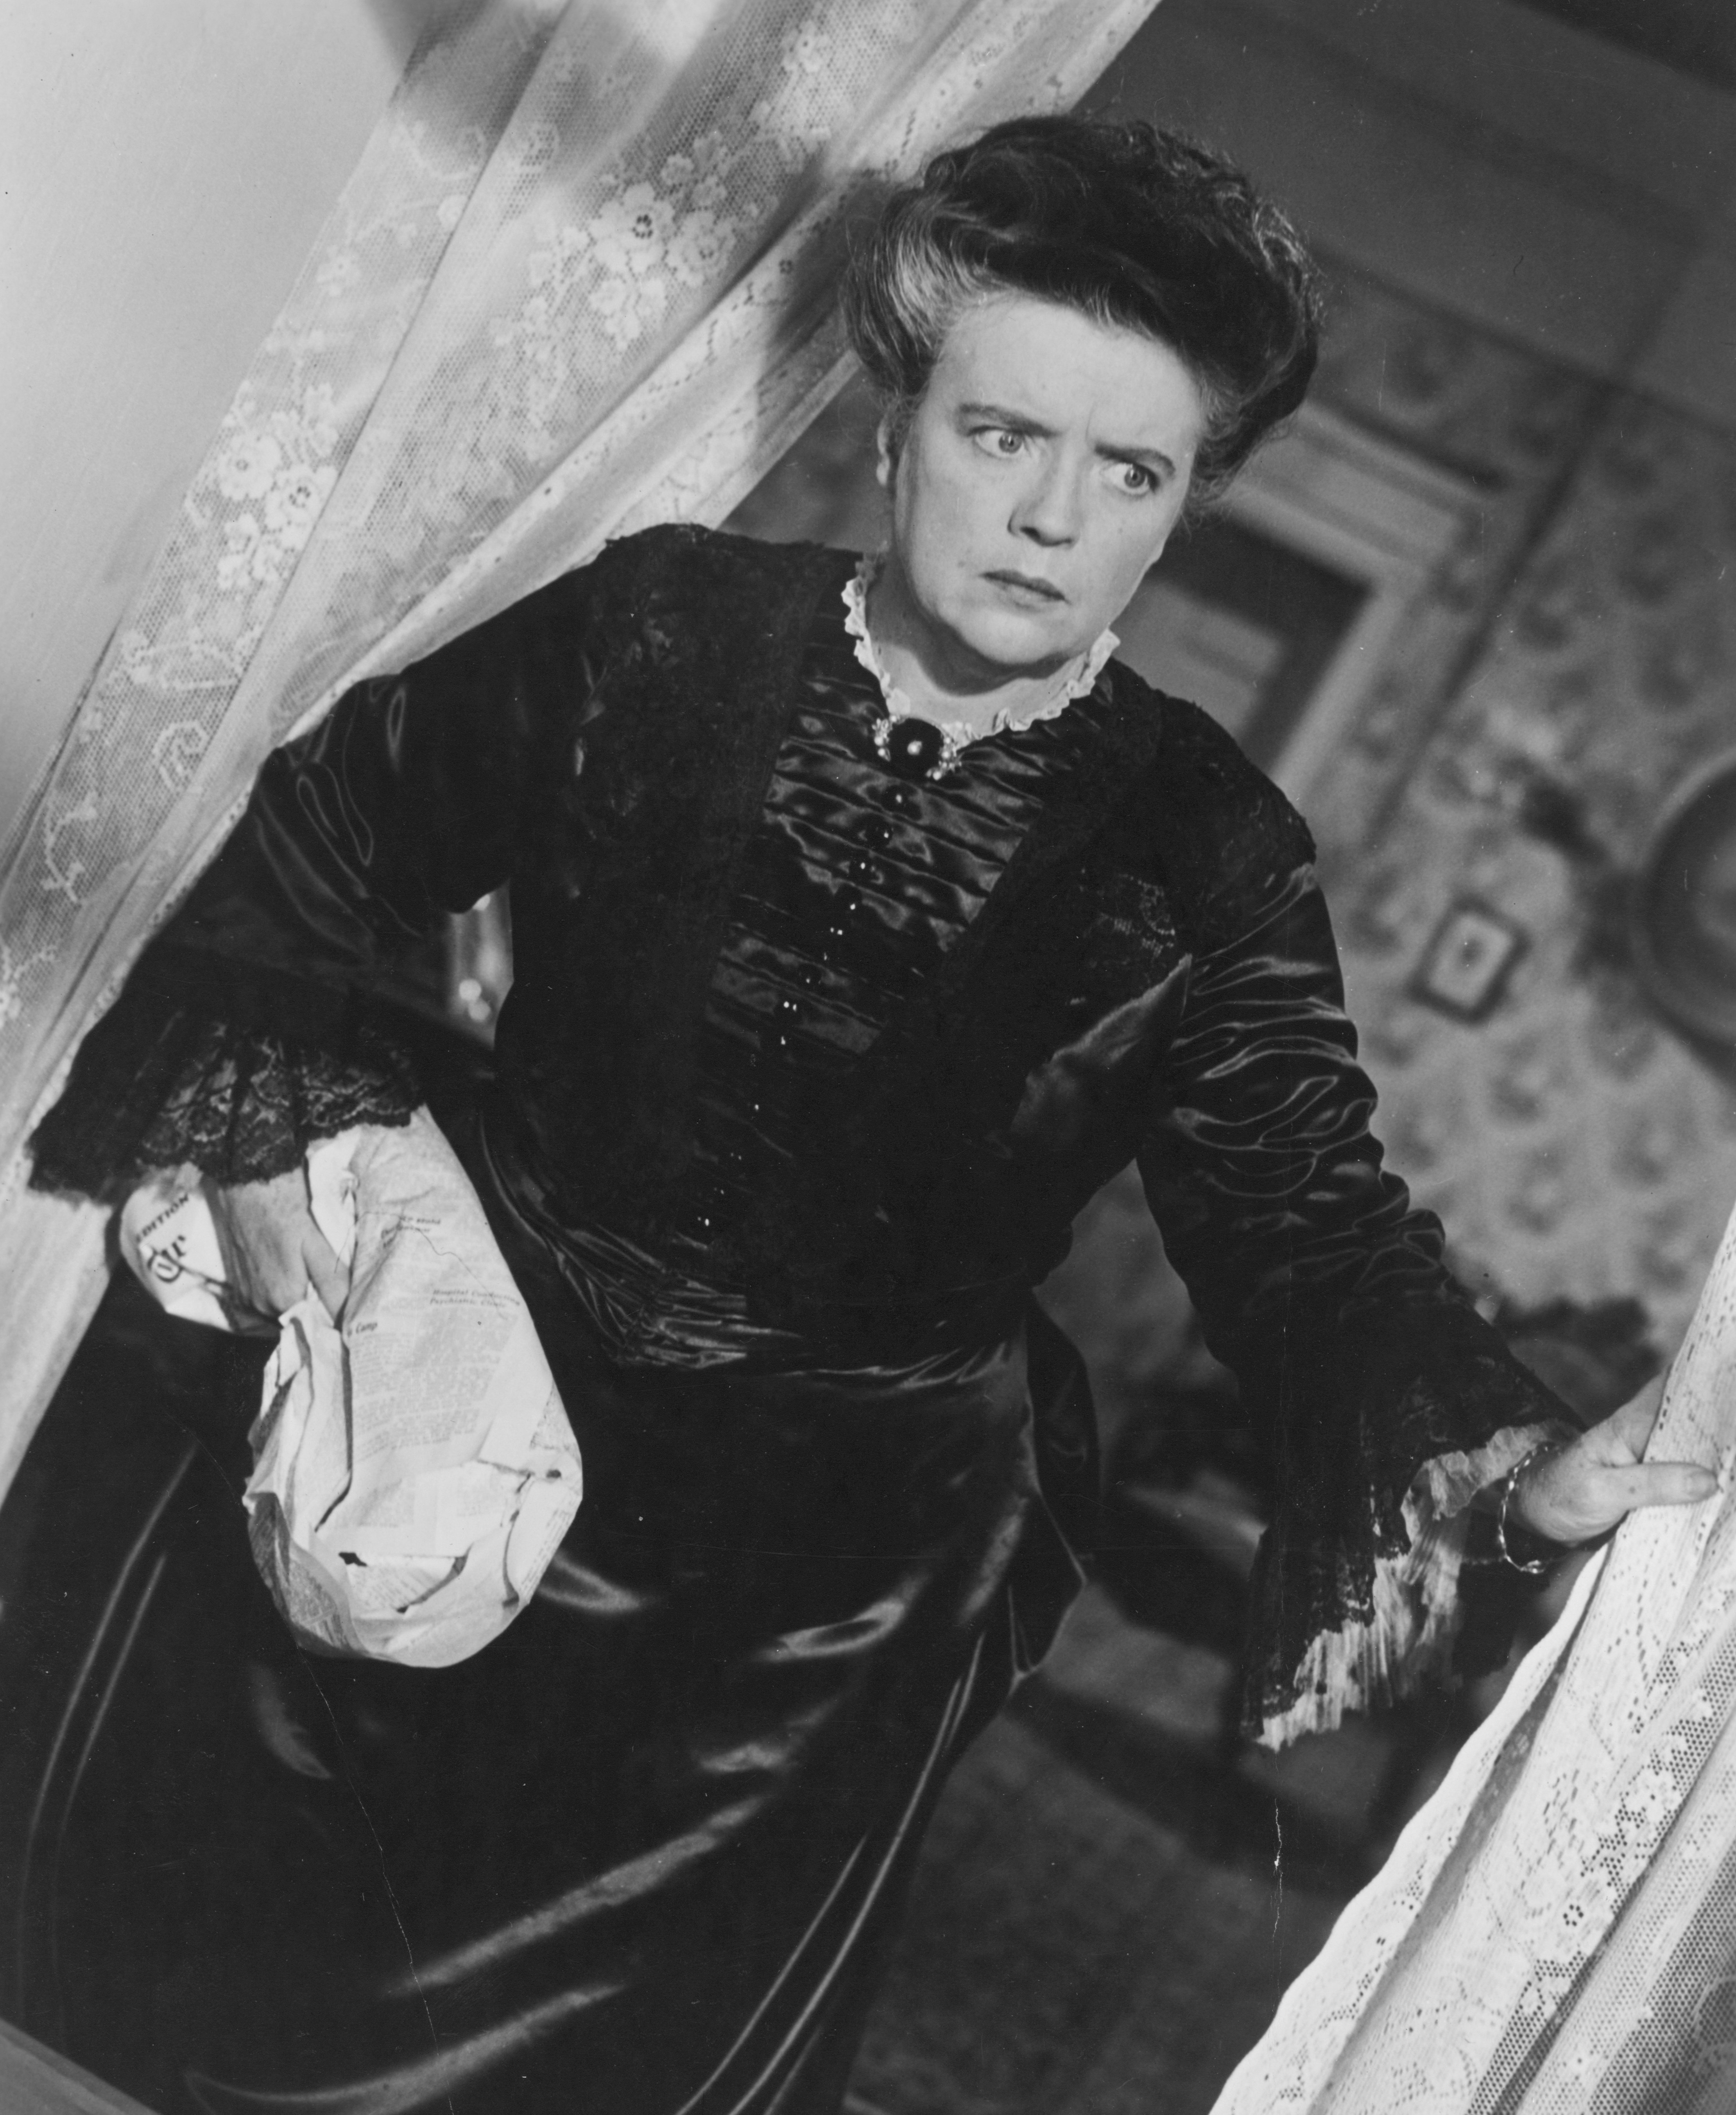 Frances Bavier as Helen Harley in the film "Man in the Attic," in 1953. | Source: Getty Images